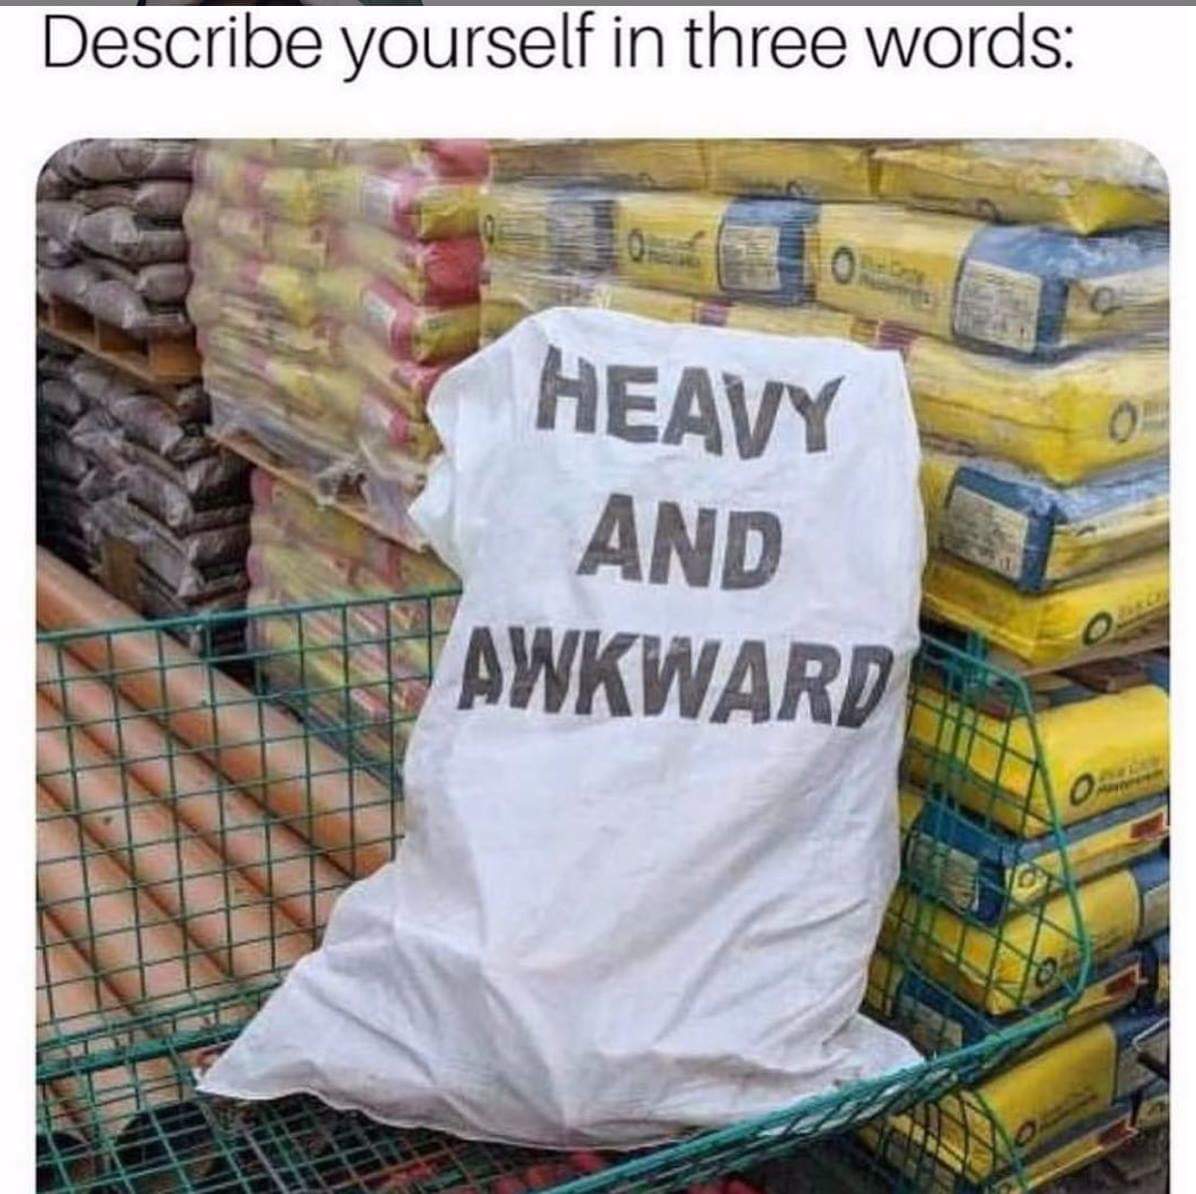 memes  - depression memes - Describe yourself in three words Heavy And | Awkward